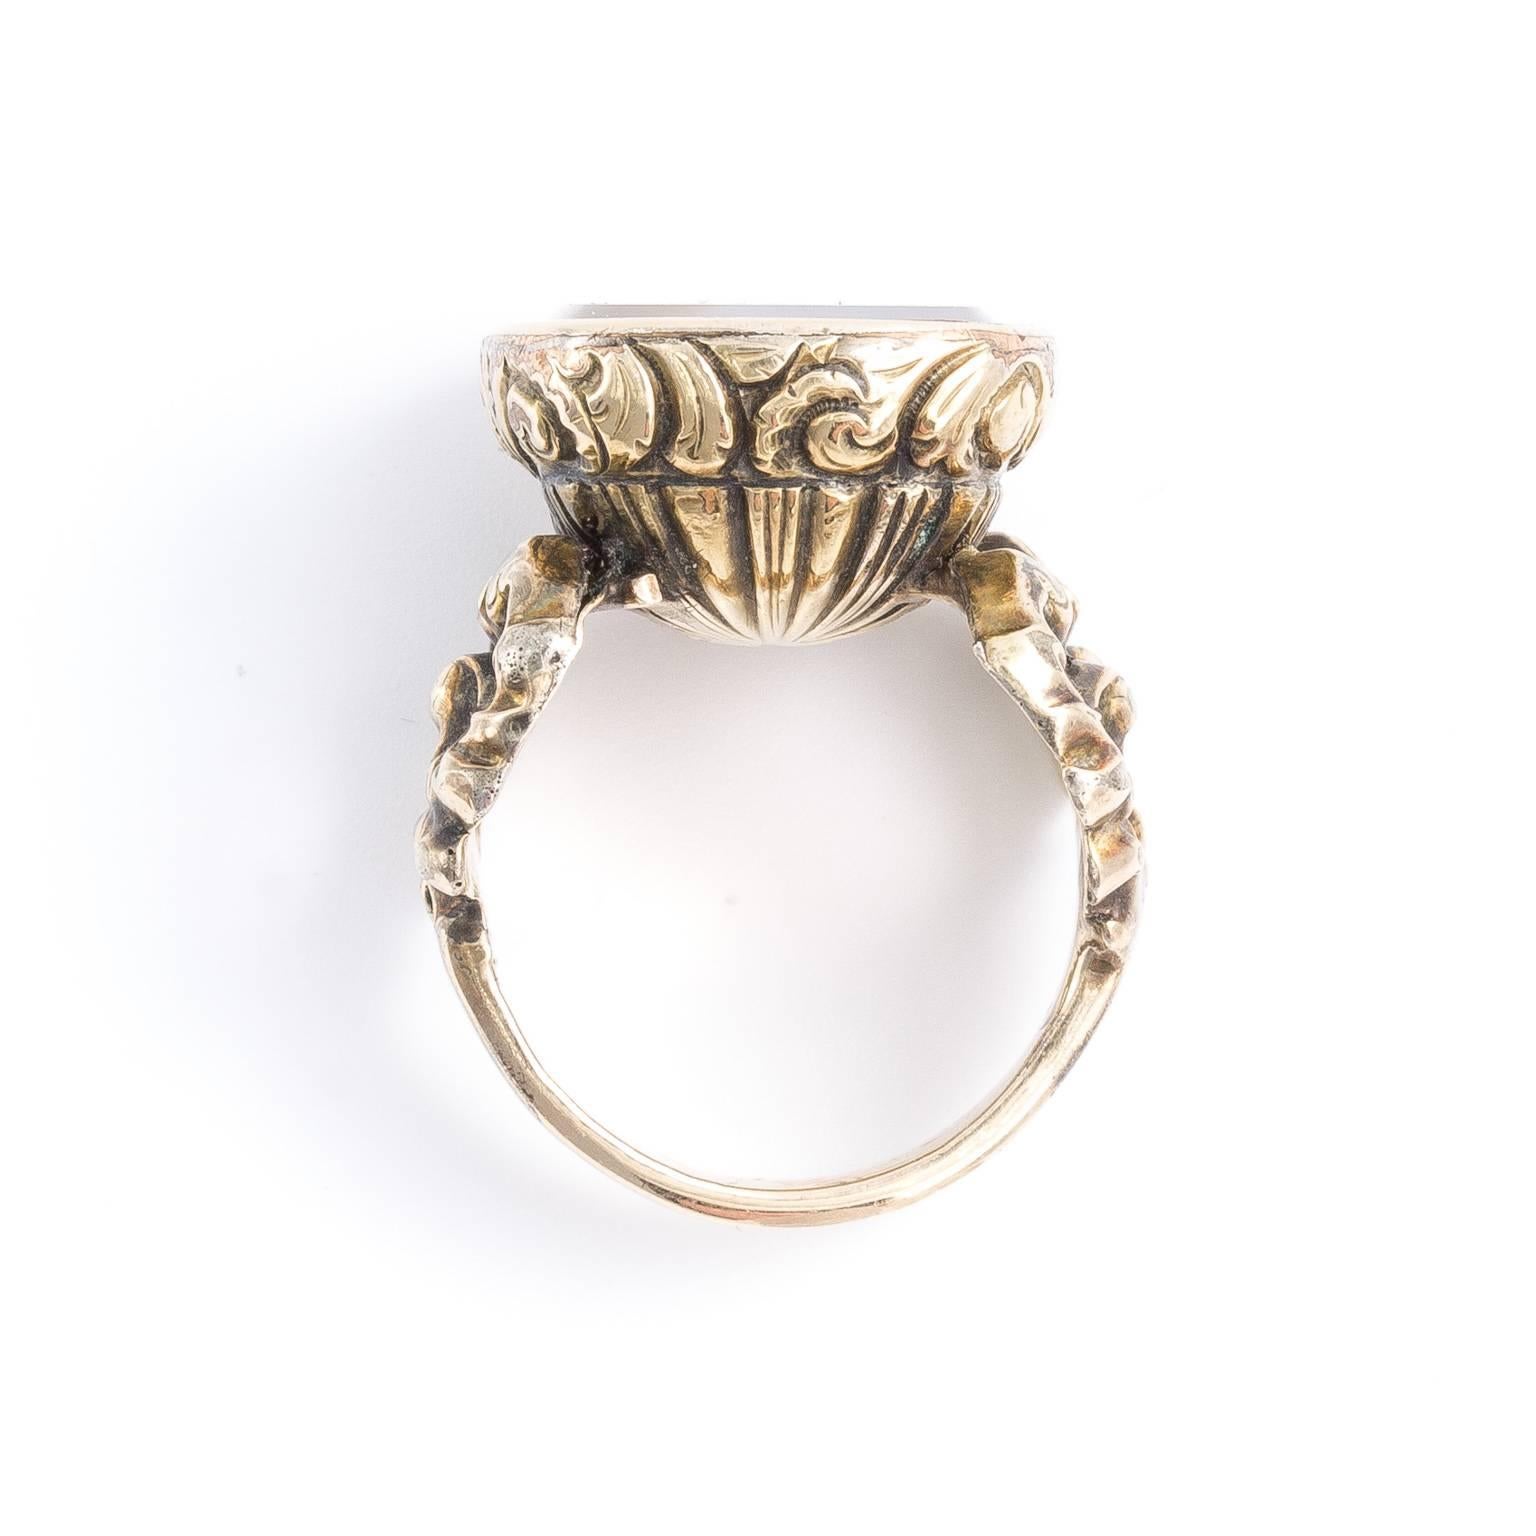 Carved quartz intaglio set into a wonderful example of mid-19th century repoussé goldwork. The ring is a size 8.25, and it weighs 23.00 grams. Intaglio Dimensions: 2.03 cm x 2.00 cm